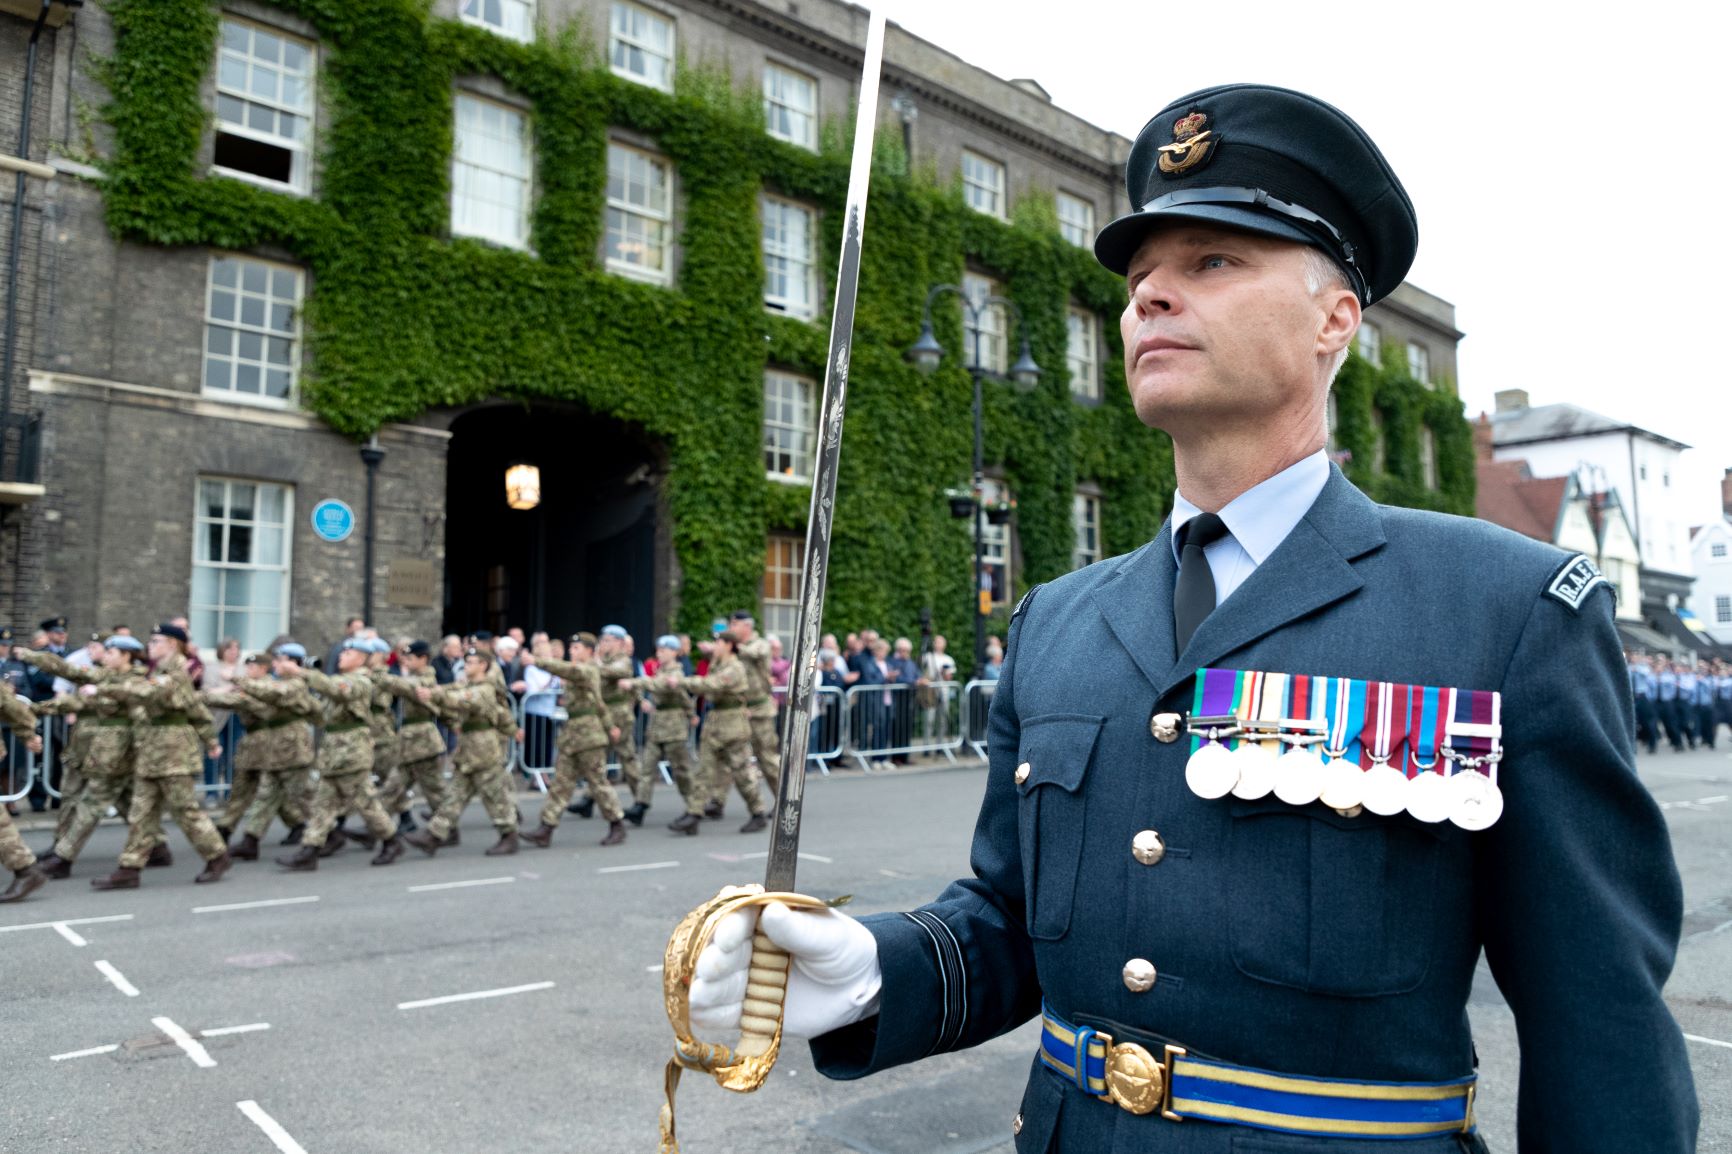 RAF Aviator holds Pooley Sword with parade in background, through the streets.